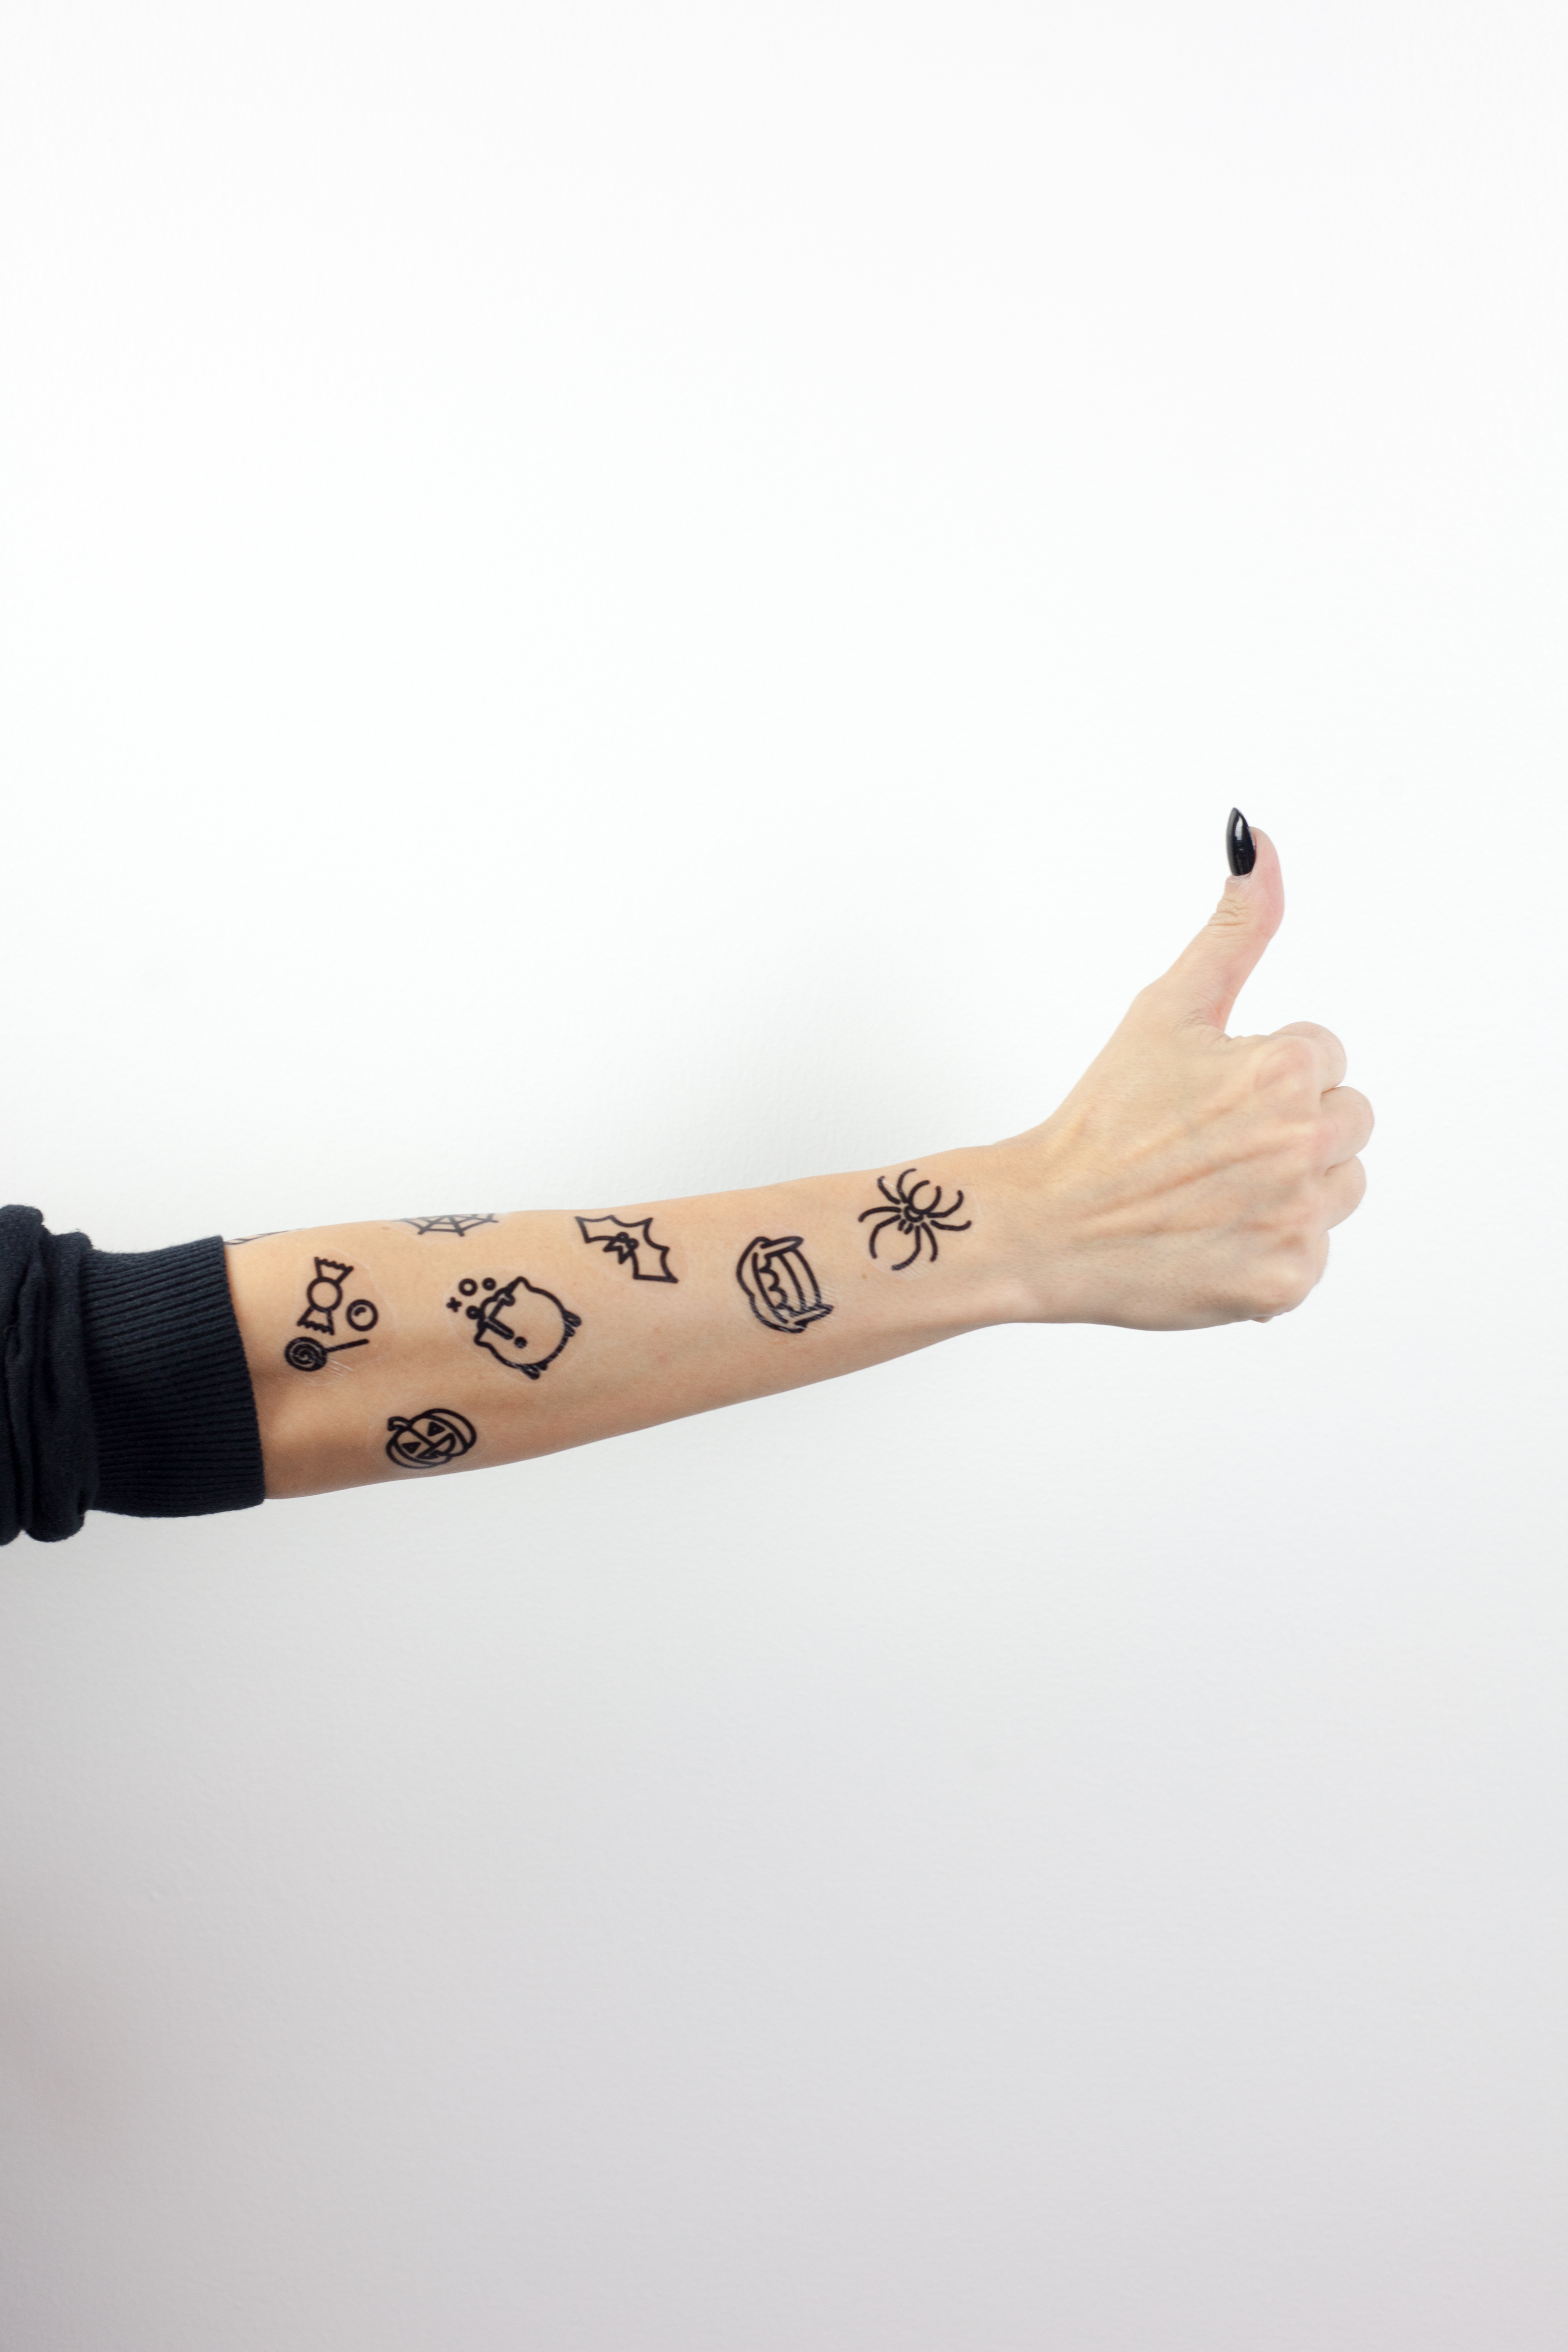 Printable Temporary Take Out Tattoos - Let's Mingle Blog